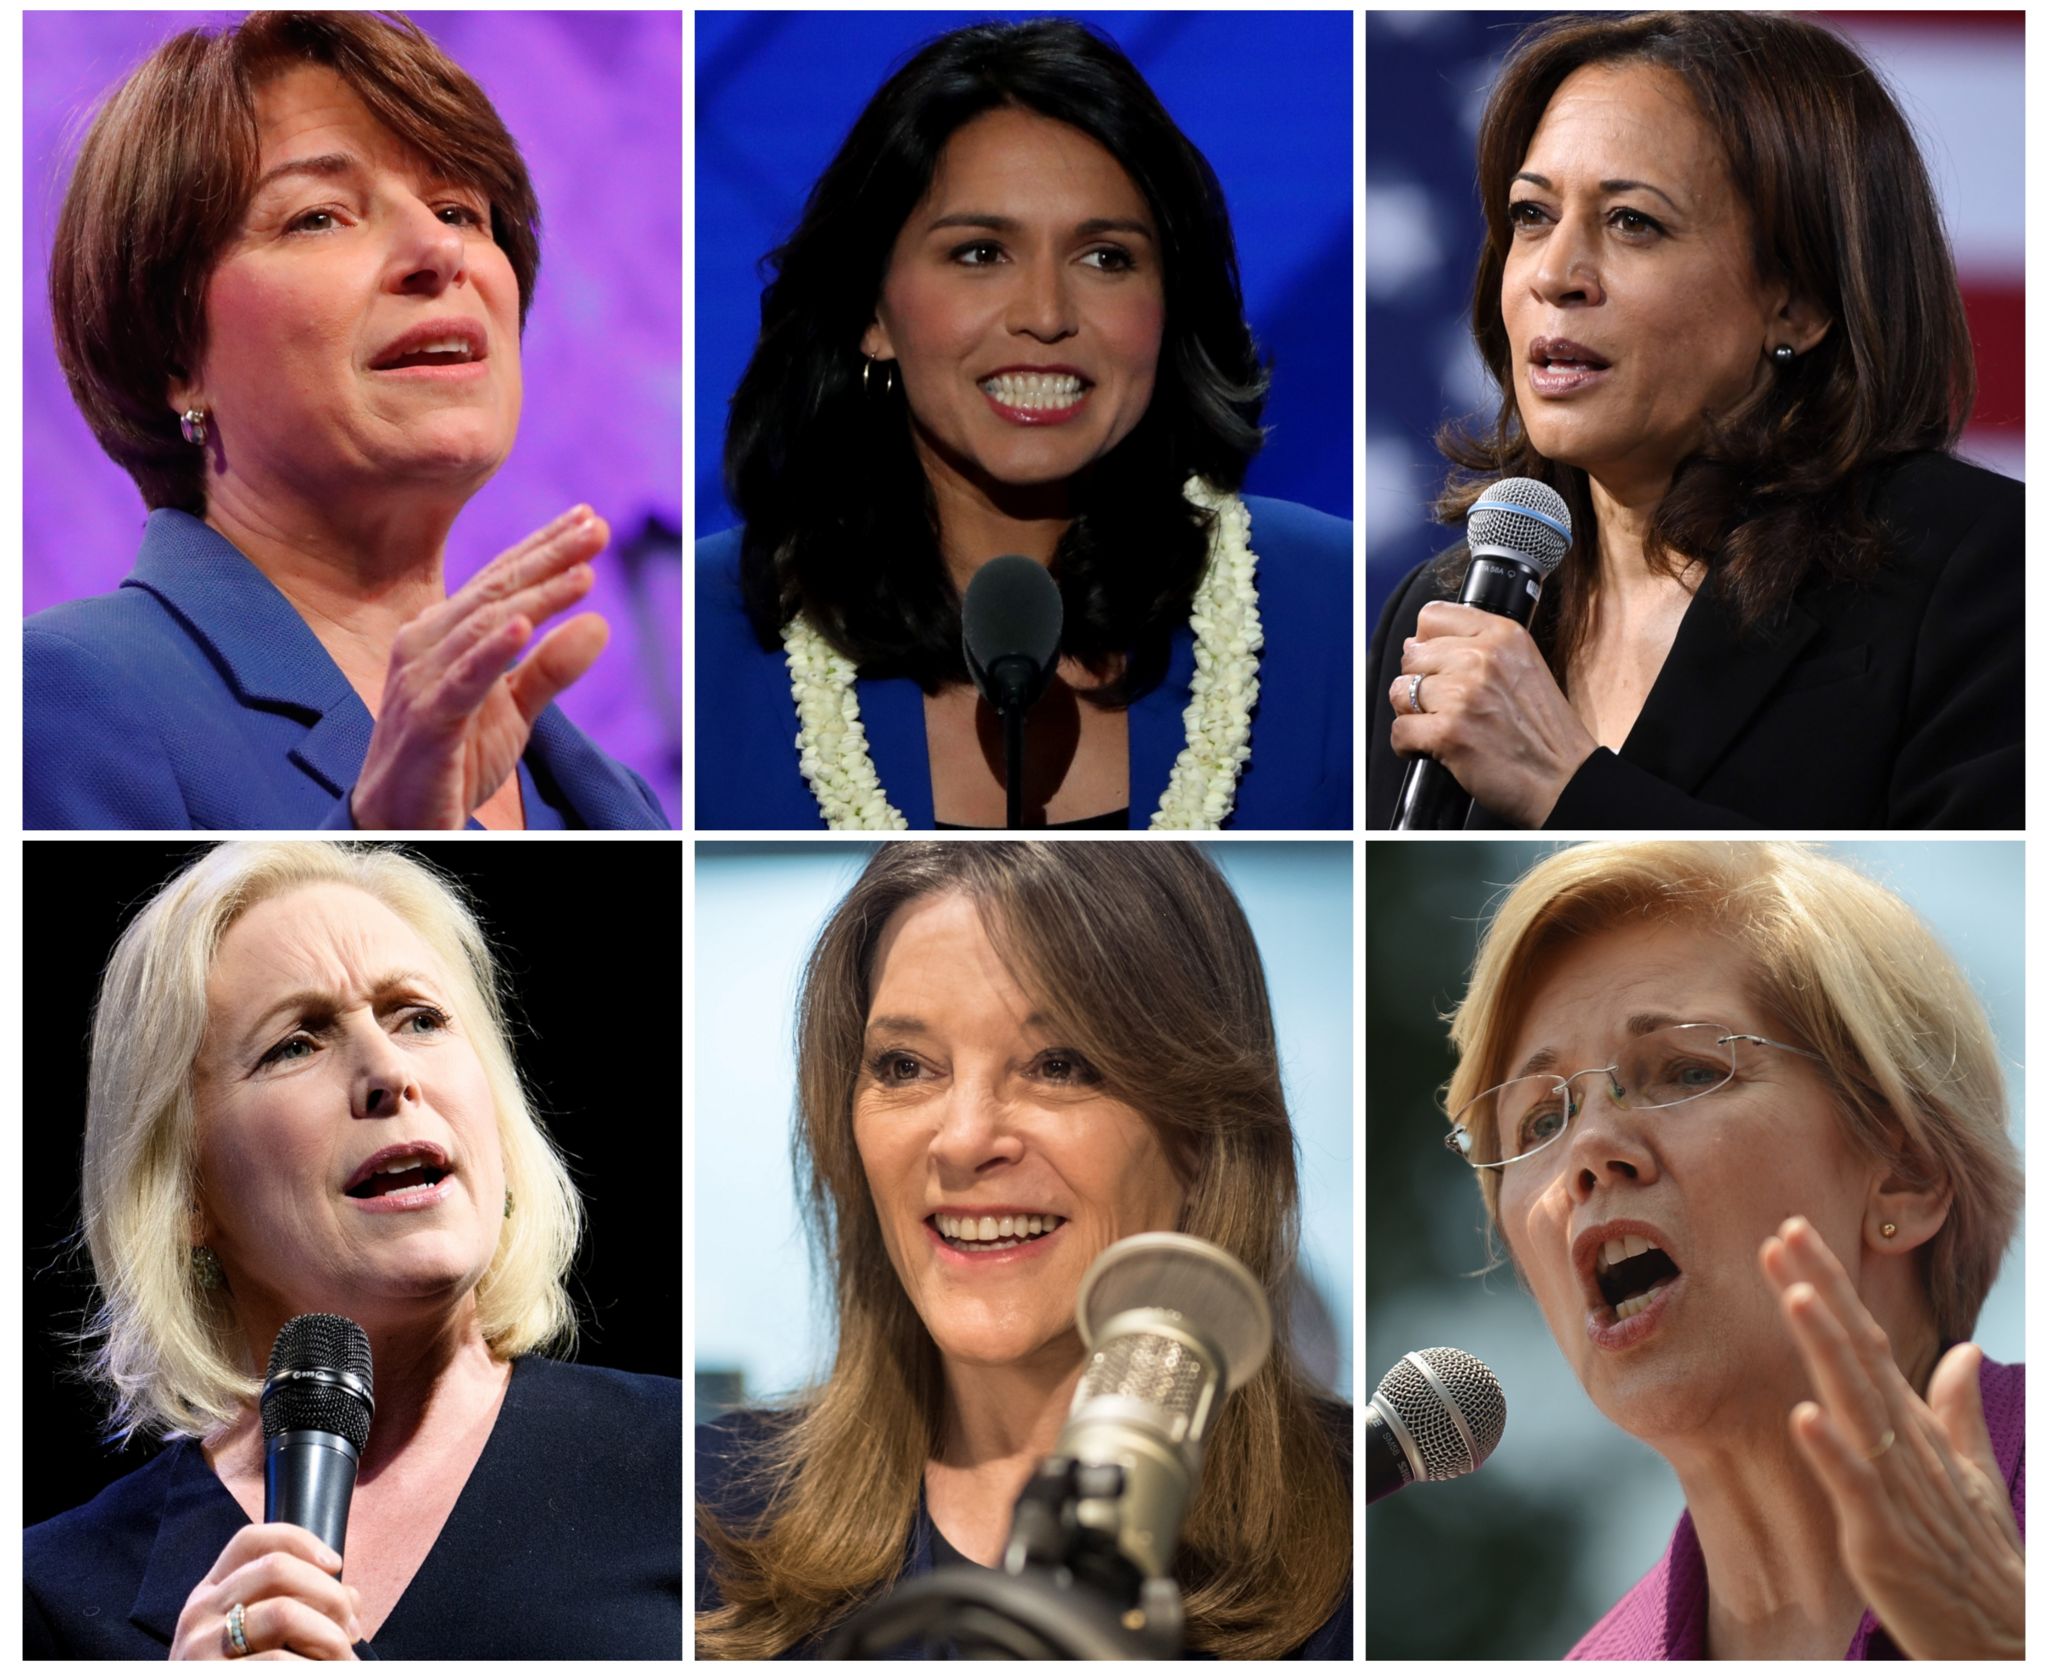 Collage photograph showing women running for Democrats